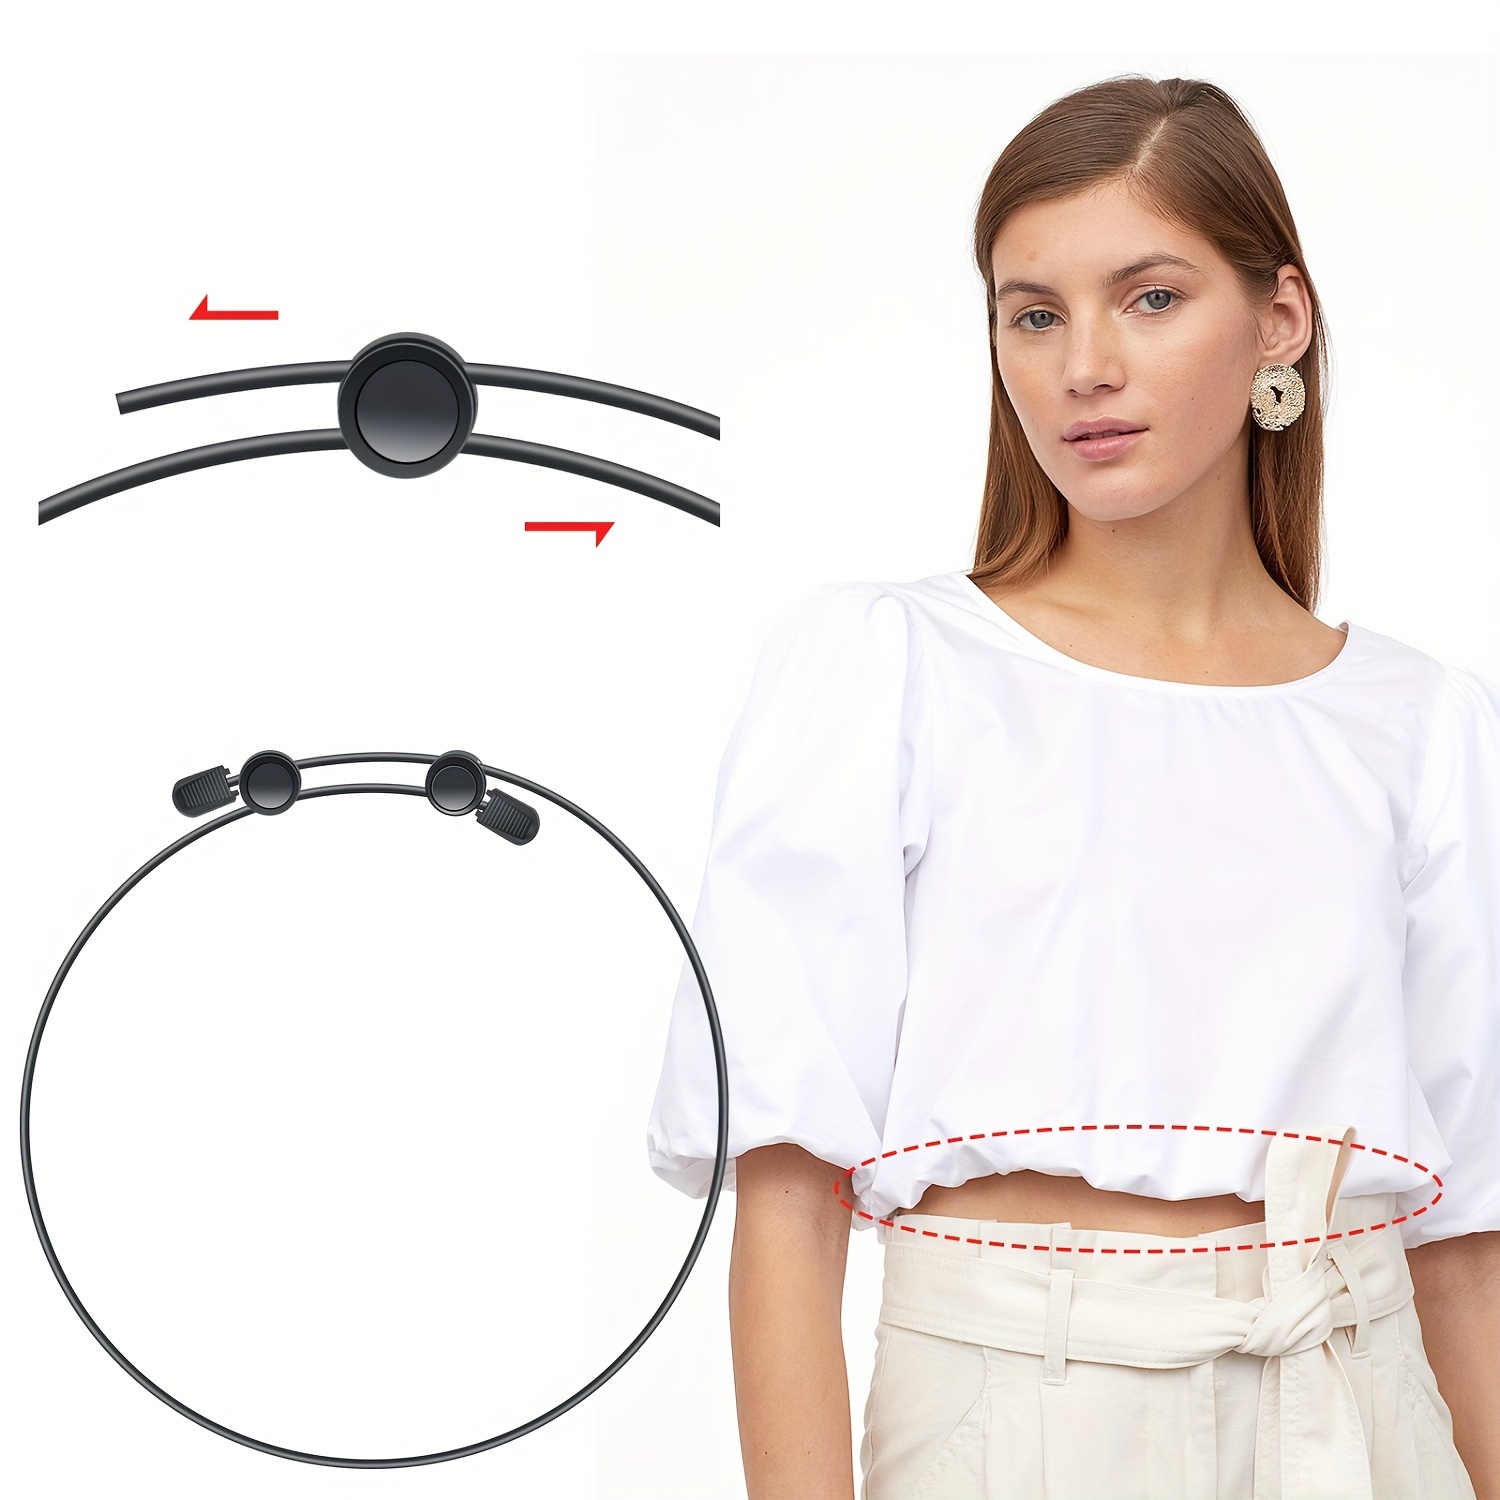 Croptuck Adjustable Band Crop Tuck Tool Lightweight Stretchy Comfortable  Adjustable Shirt Cropping Band